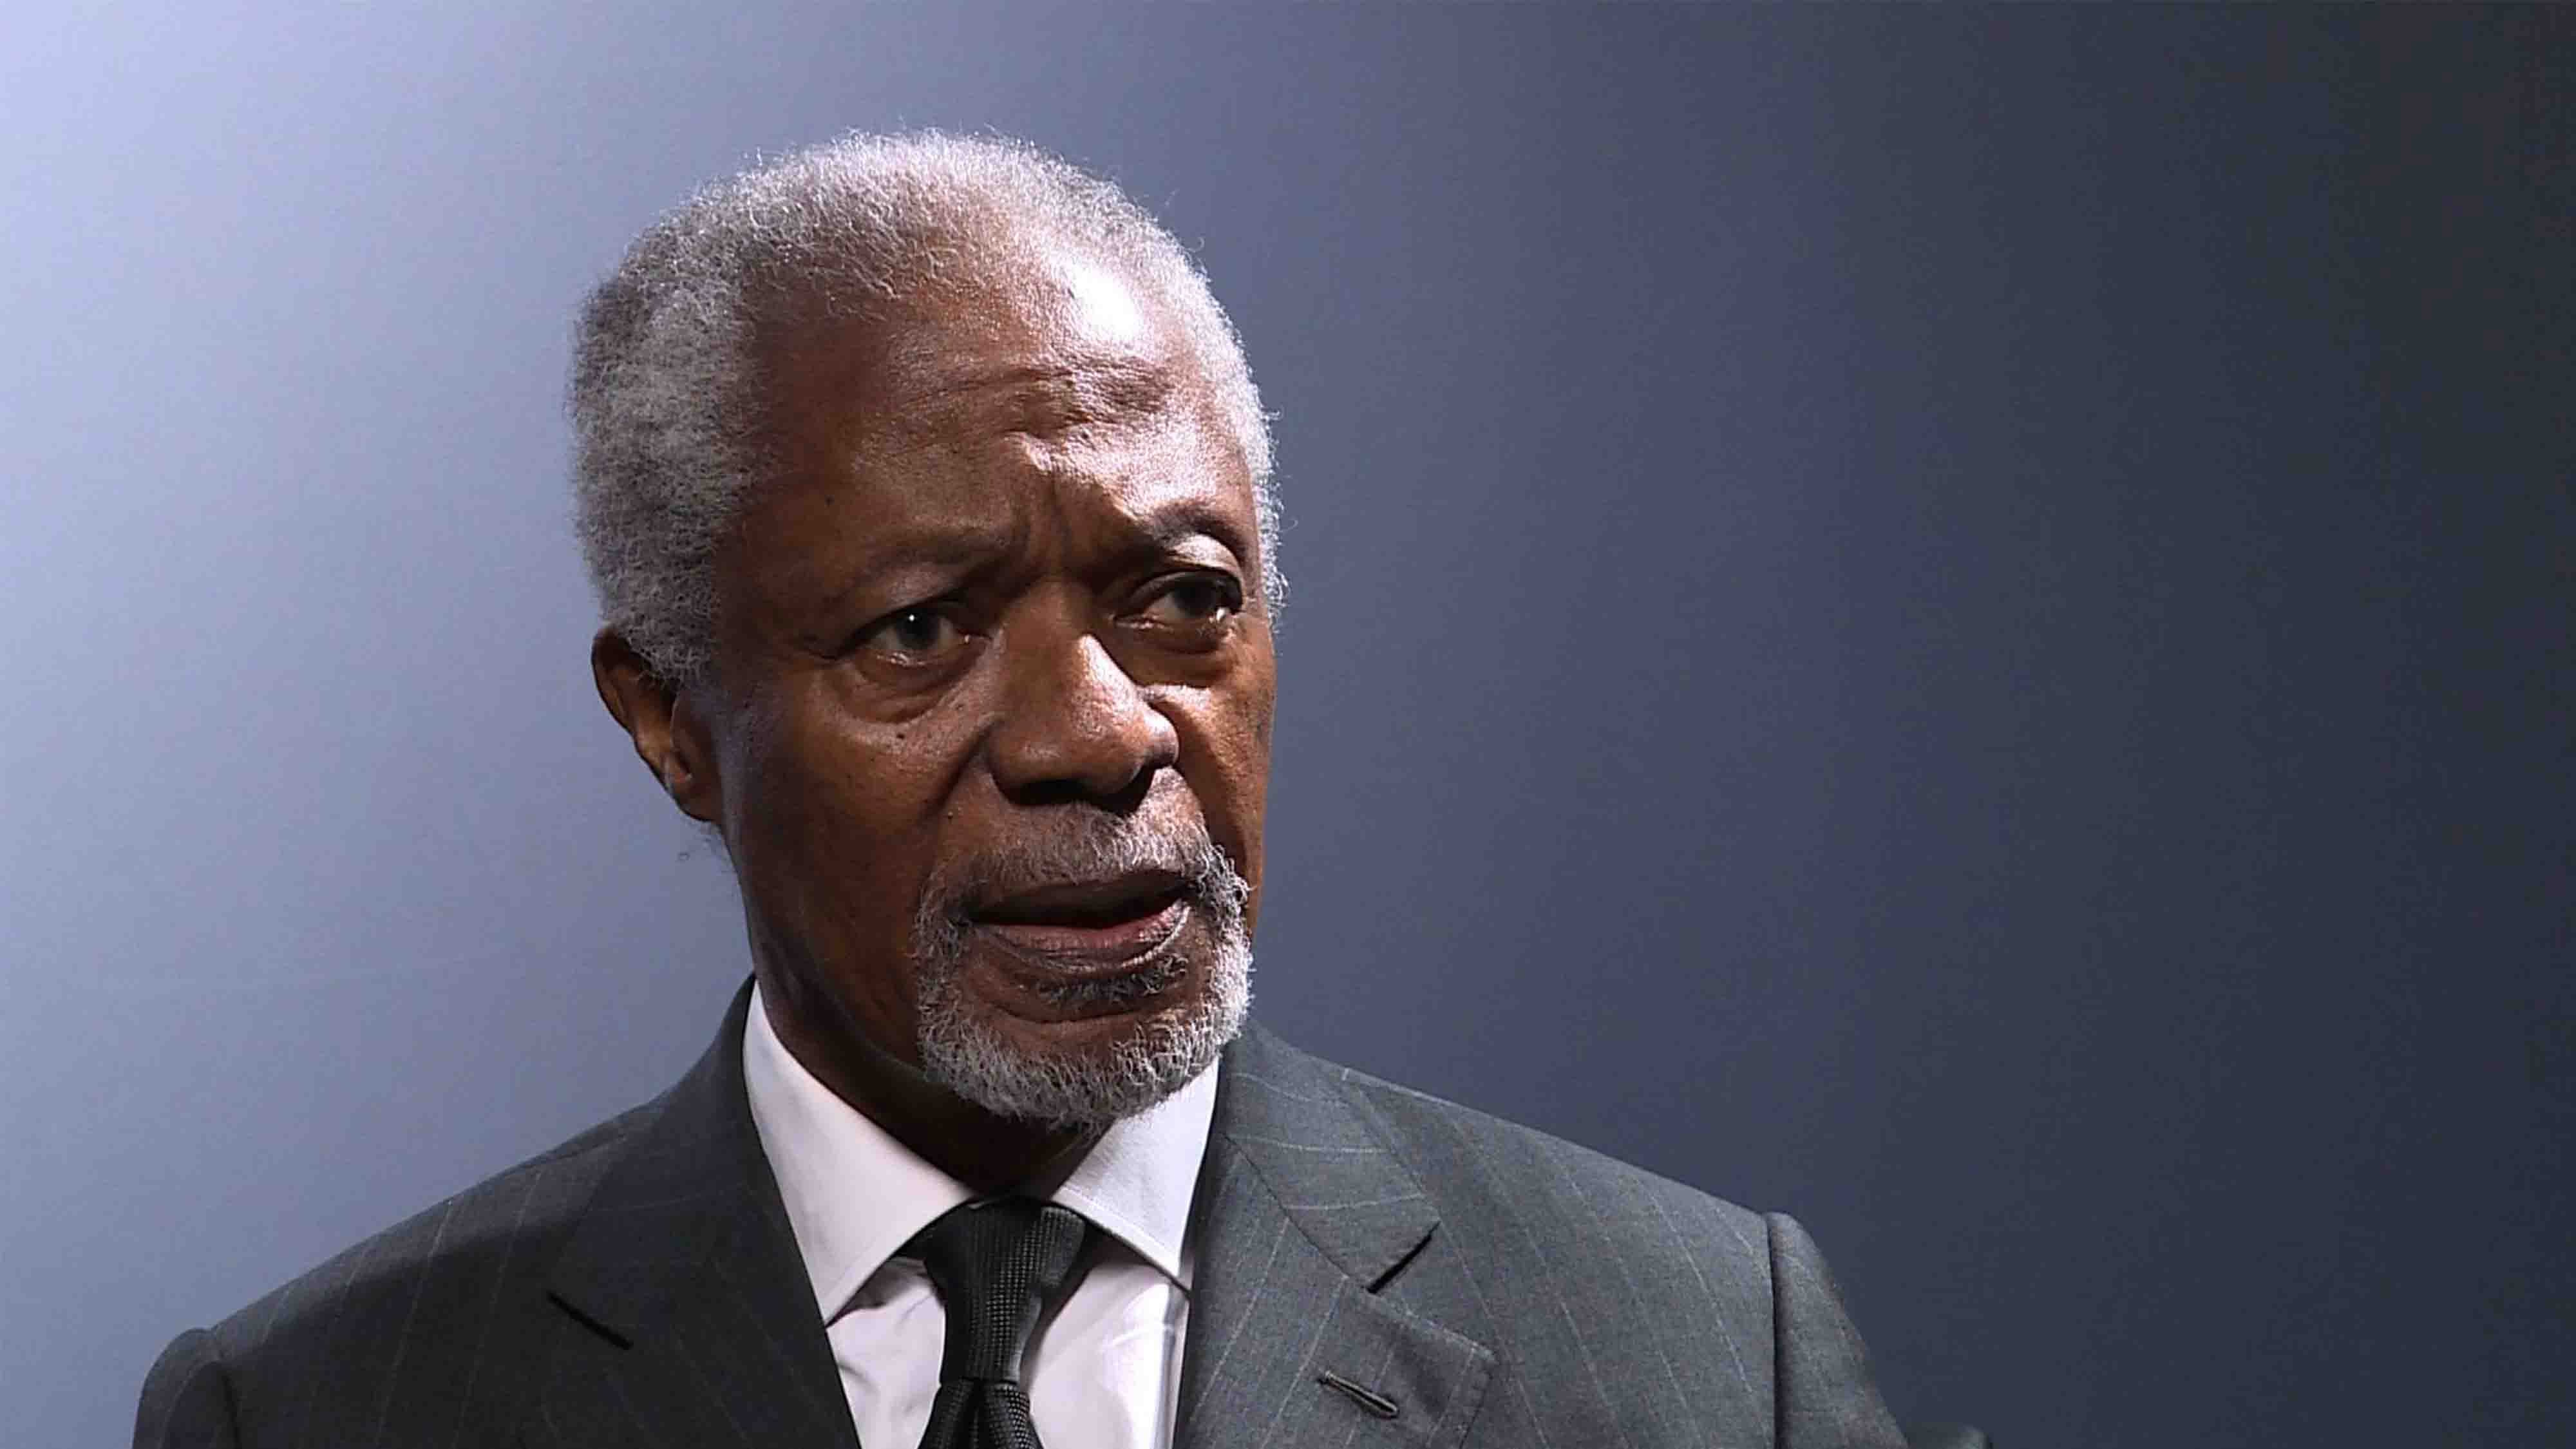 former-un-chief-kofi-annan-warned-the-world-was-currently-a-mess-and